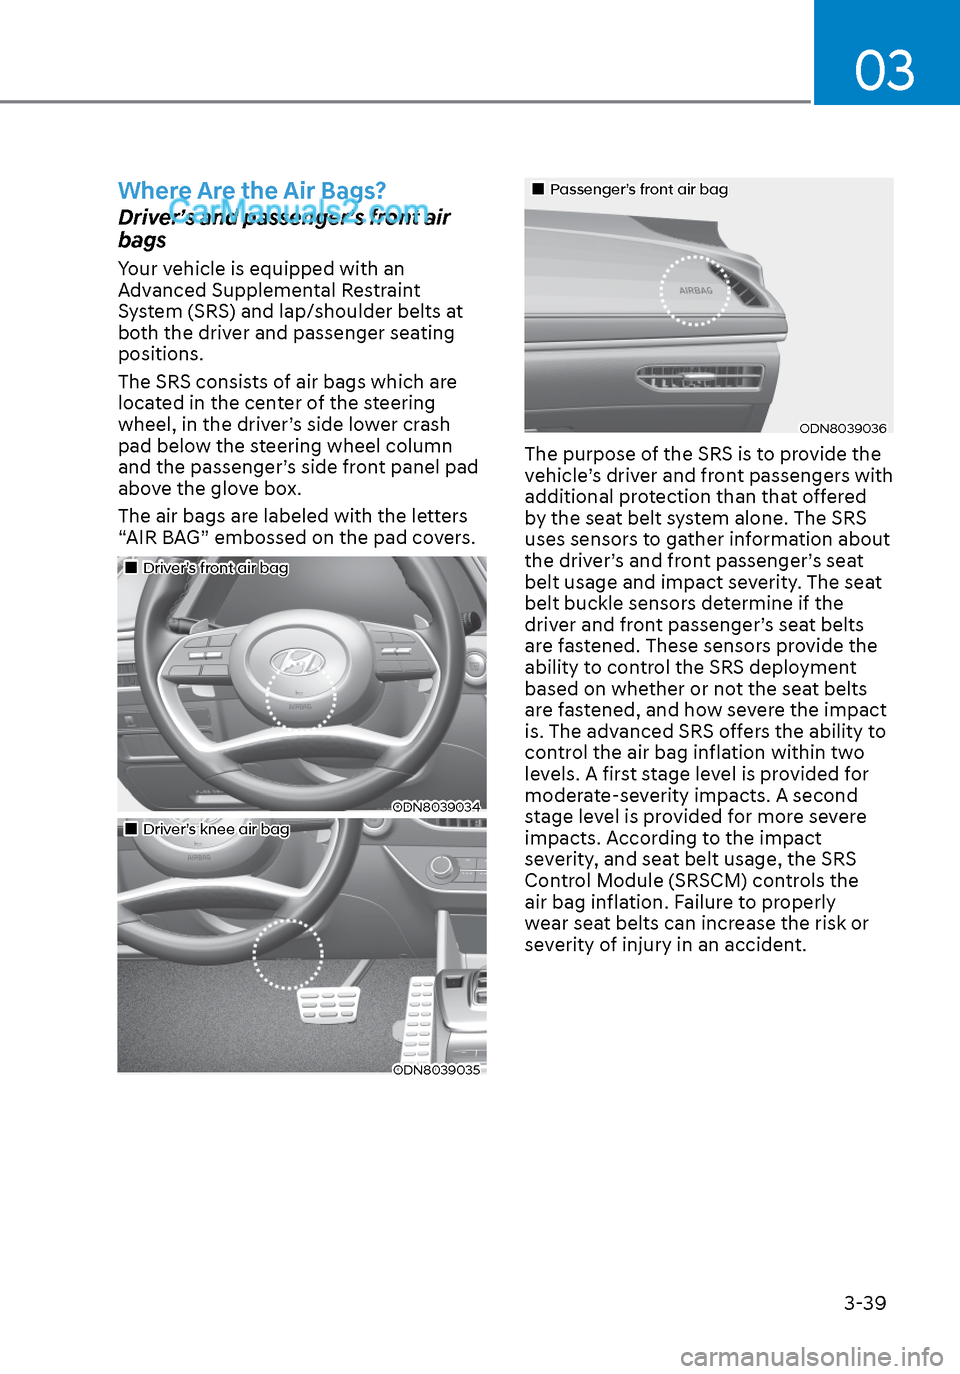 Hyundai Sonata 2020  Owners Manual 03
3-39
 Where Are the Air Bags?
Driver’s and passenger’s front air 
bags
Your vehicle is equipped with an 
Advanced Supplemental Restraint 
System (SRS) and lap/shoulder belts at 
both the driver